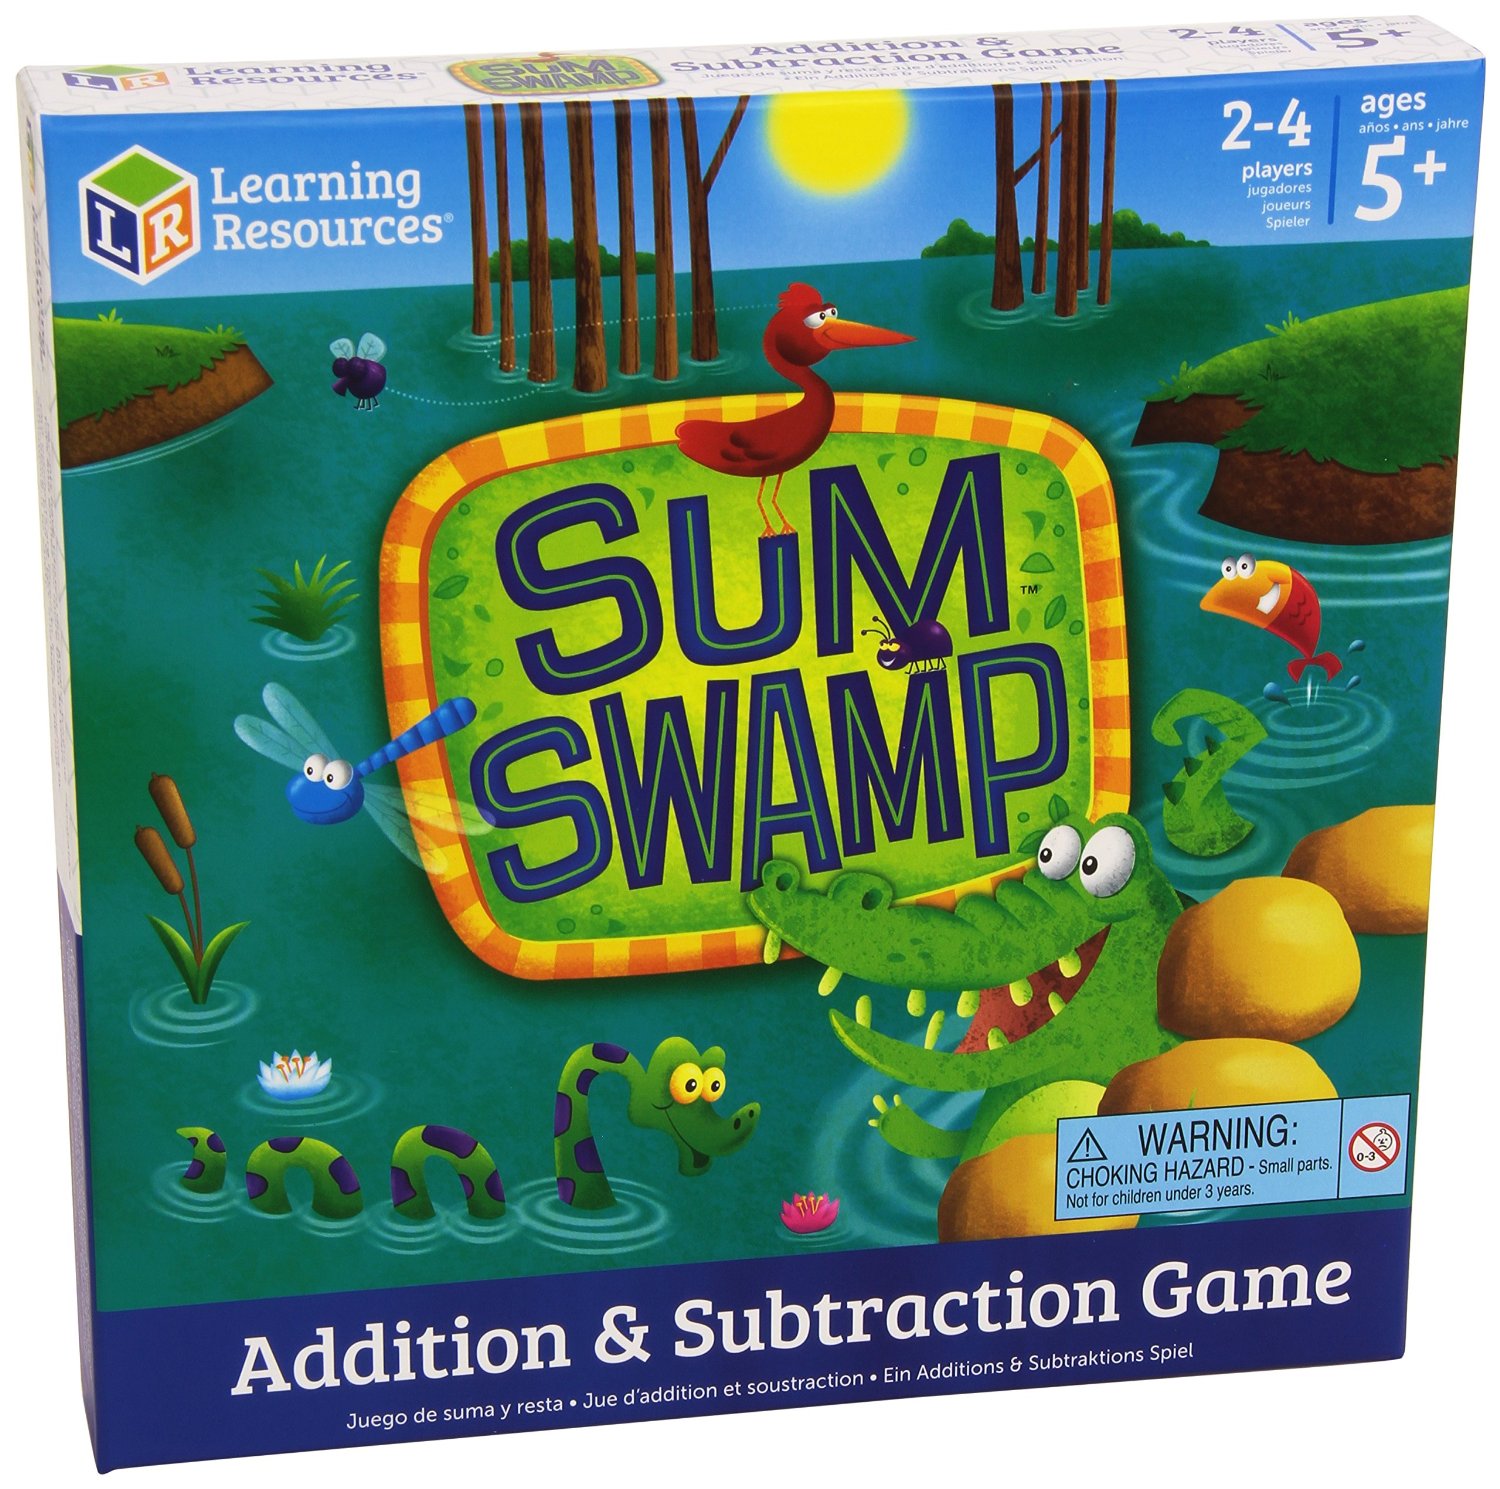 Disguise learning as play with these fun educational games for elementary age kids.